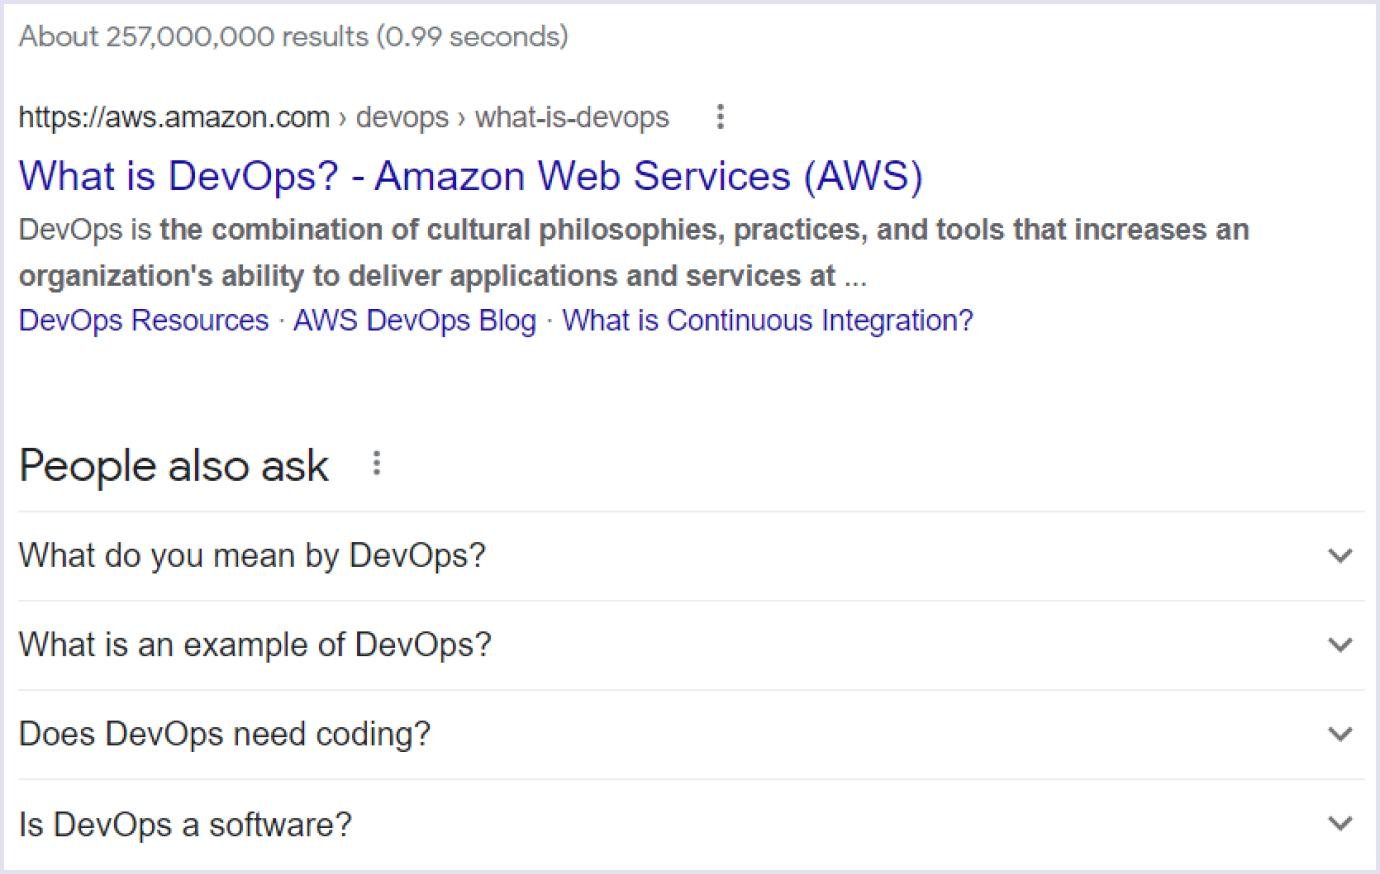 Top article on DevOps in search results